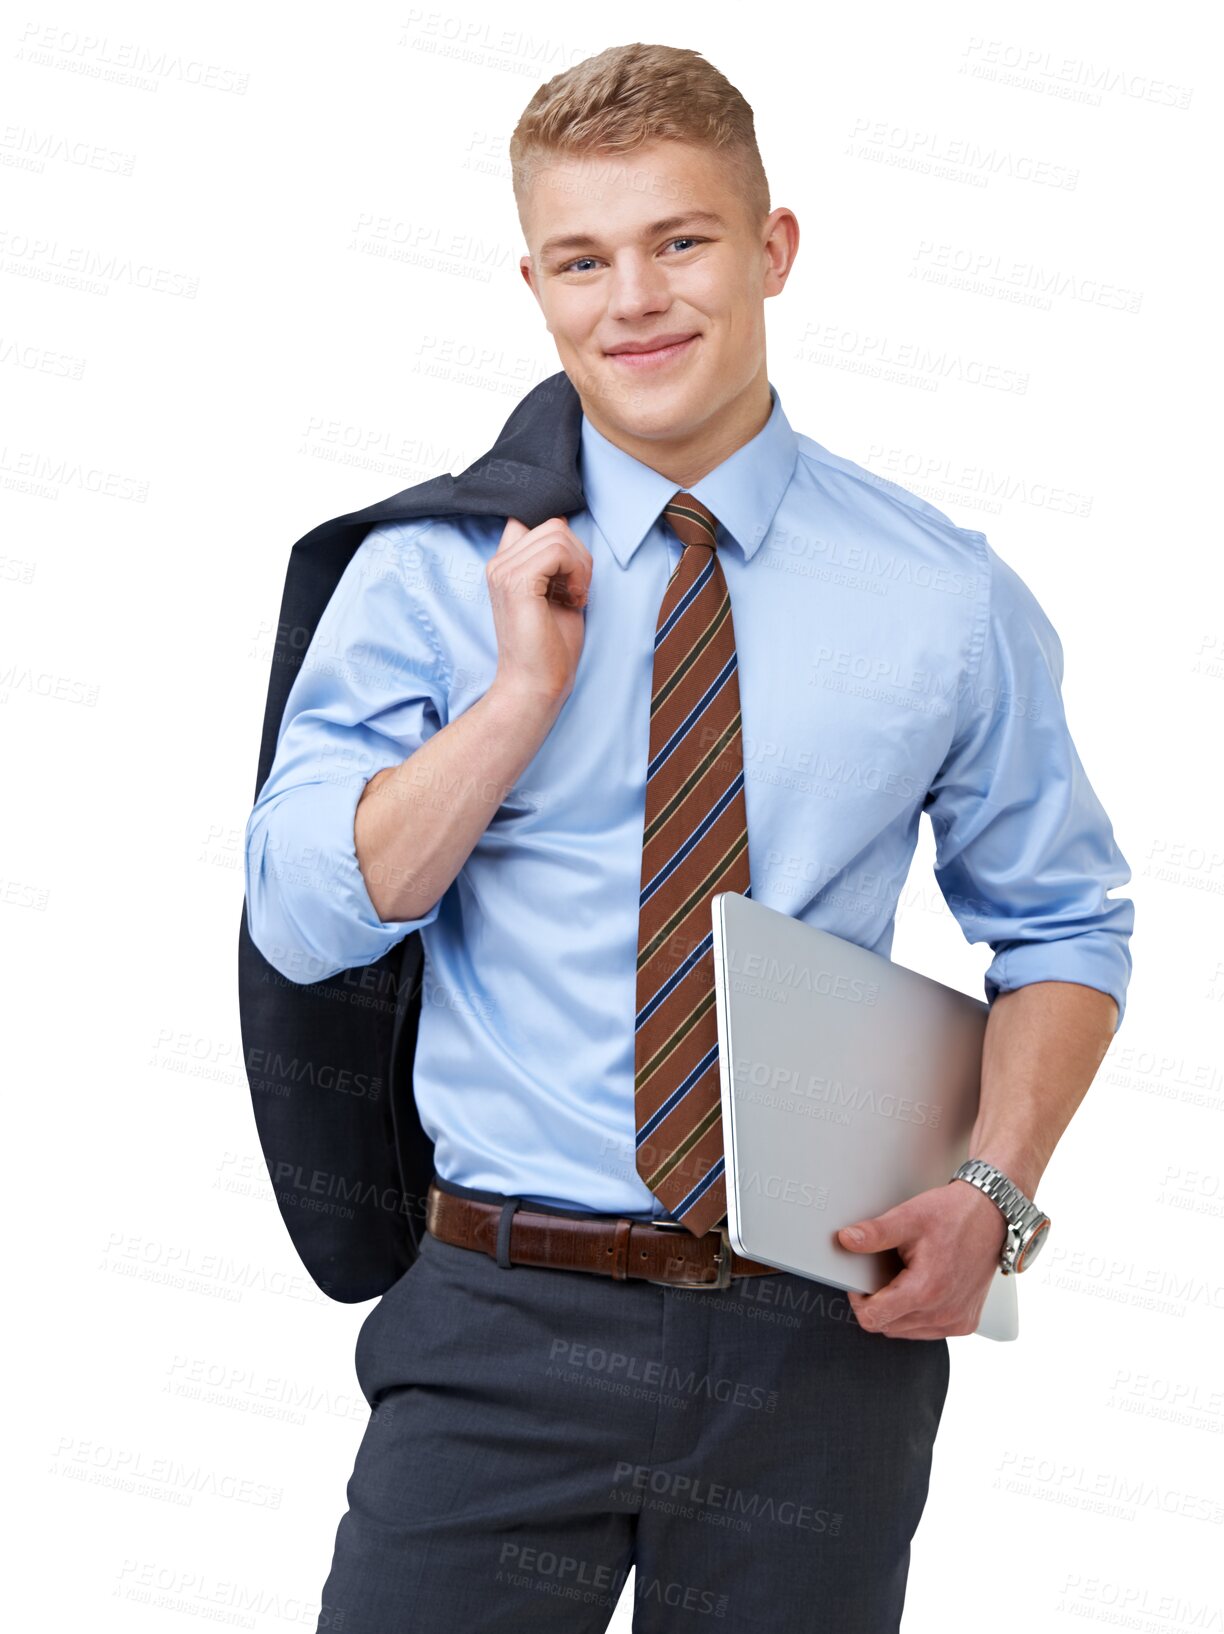 Buy stock photo Portrait, businessman or happy accountant with laptop isolated on transparent png background. Confidence, technology or proud auditor smiling with pride, positive mindset or blazer jacket on shoulder